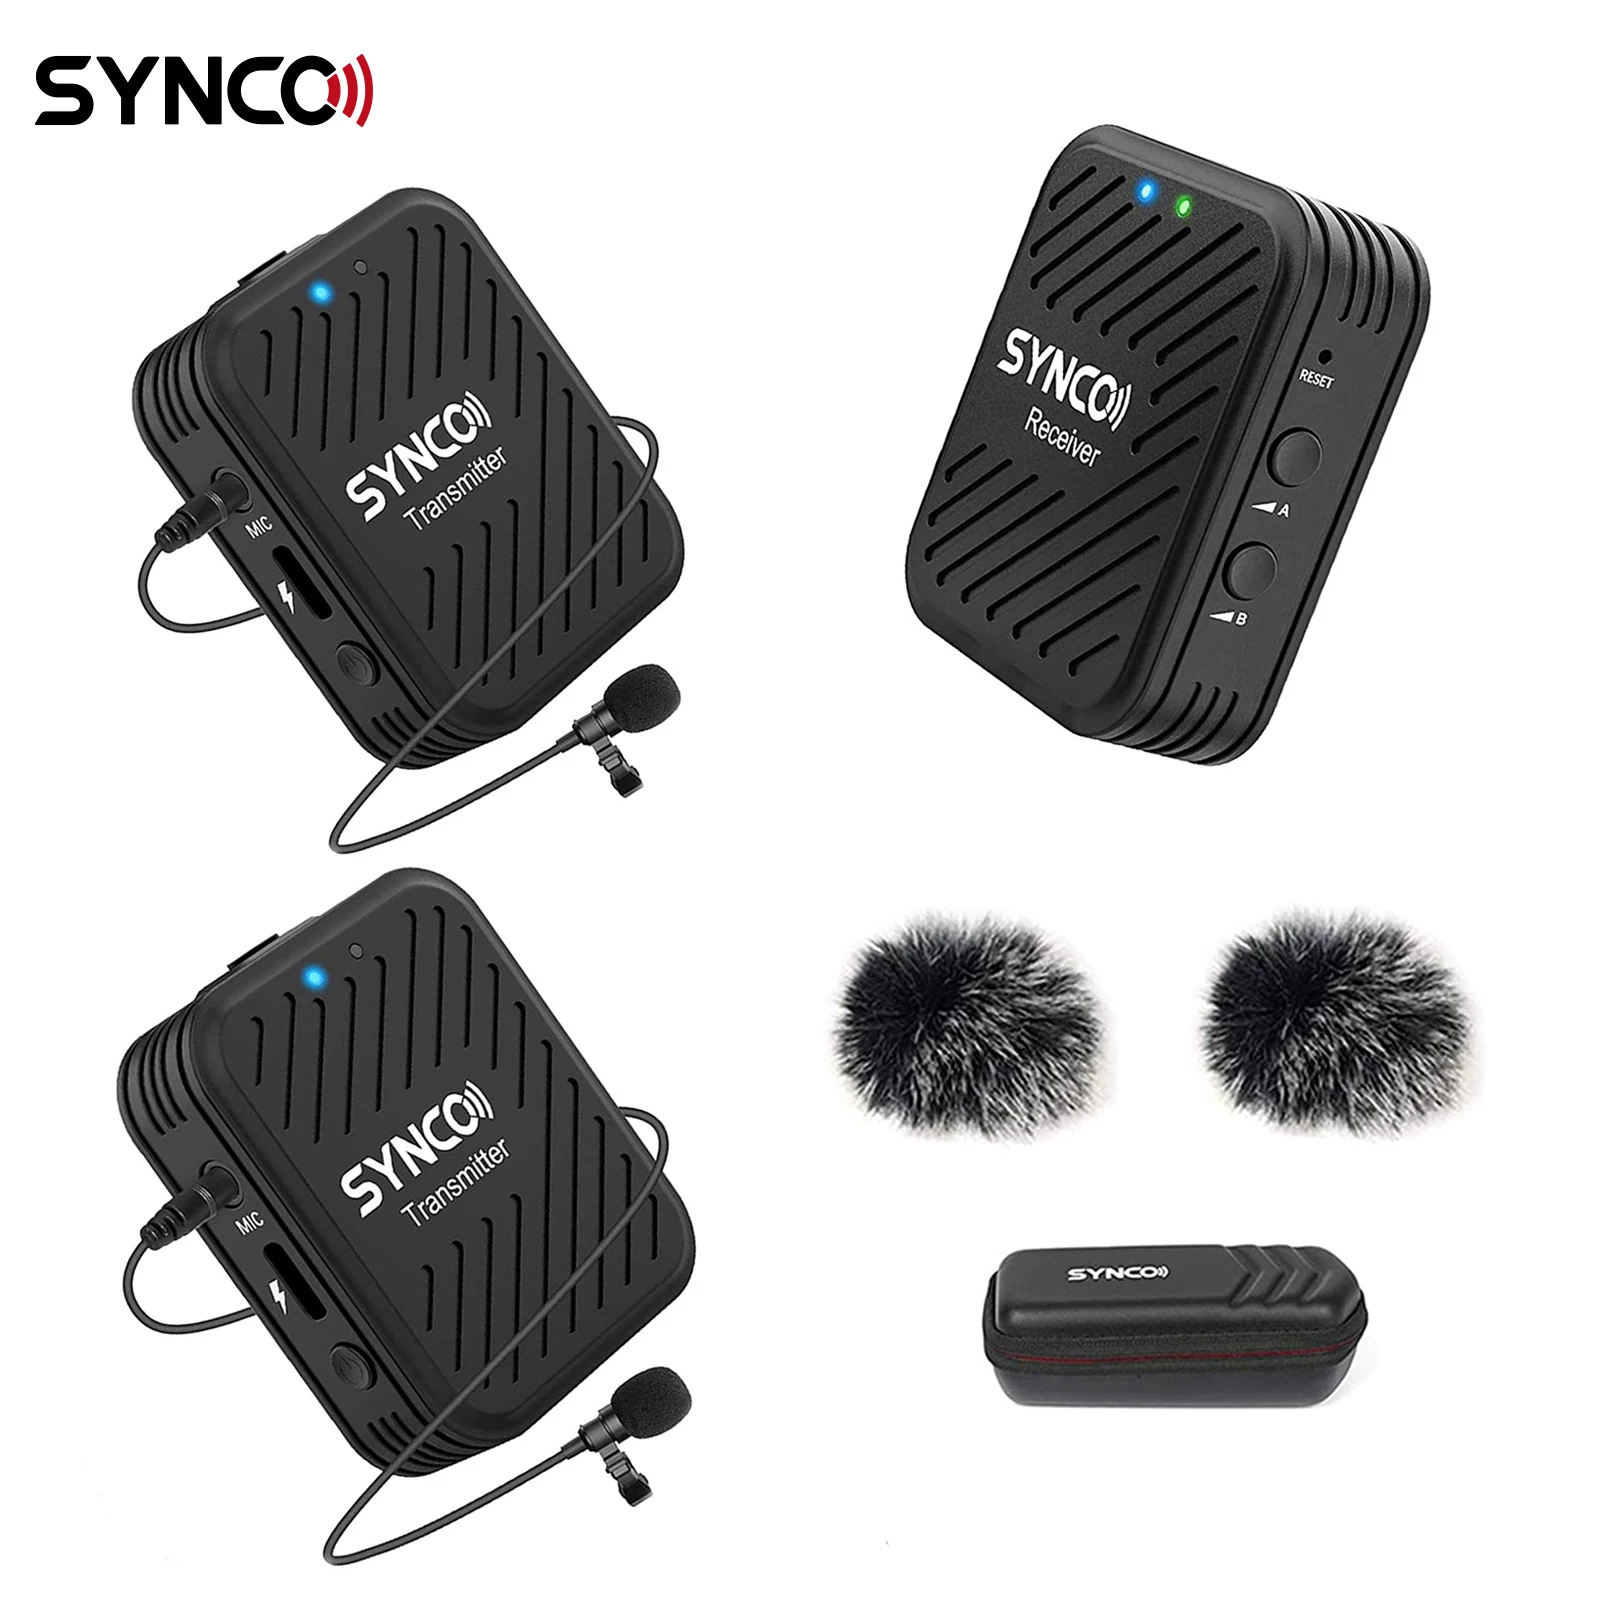 

SYNCO G1(A2) 2.4G Wireless Microphone System with 1 Receiver & 2 Transmitters & 2 Lavalier Microphones 50M Range 3.5mm Plug